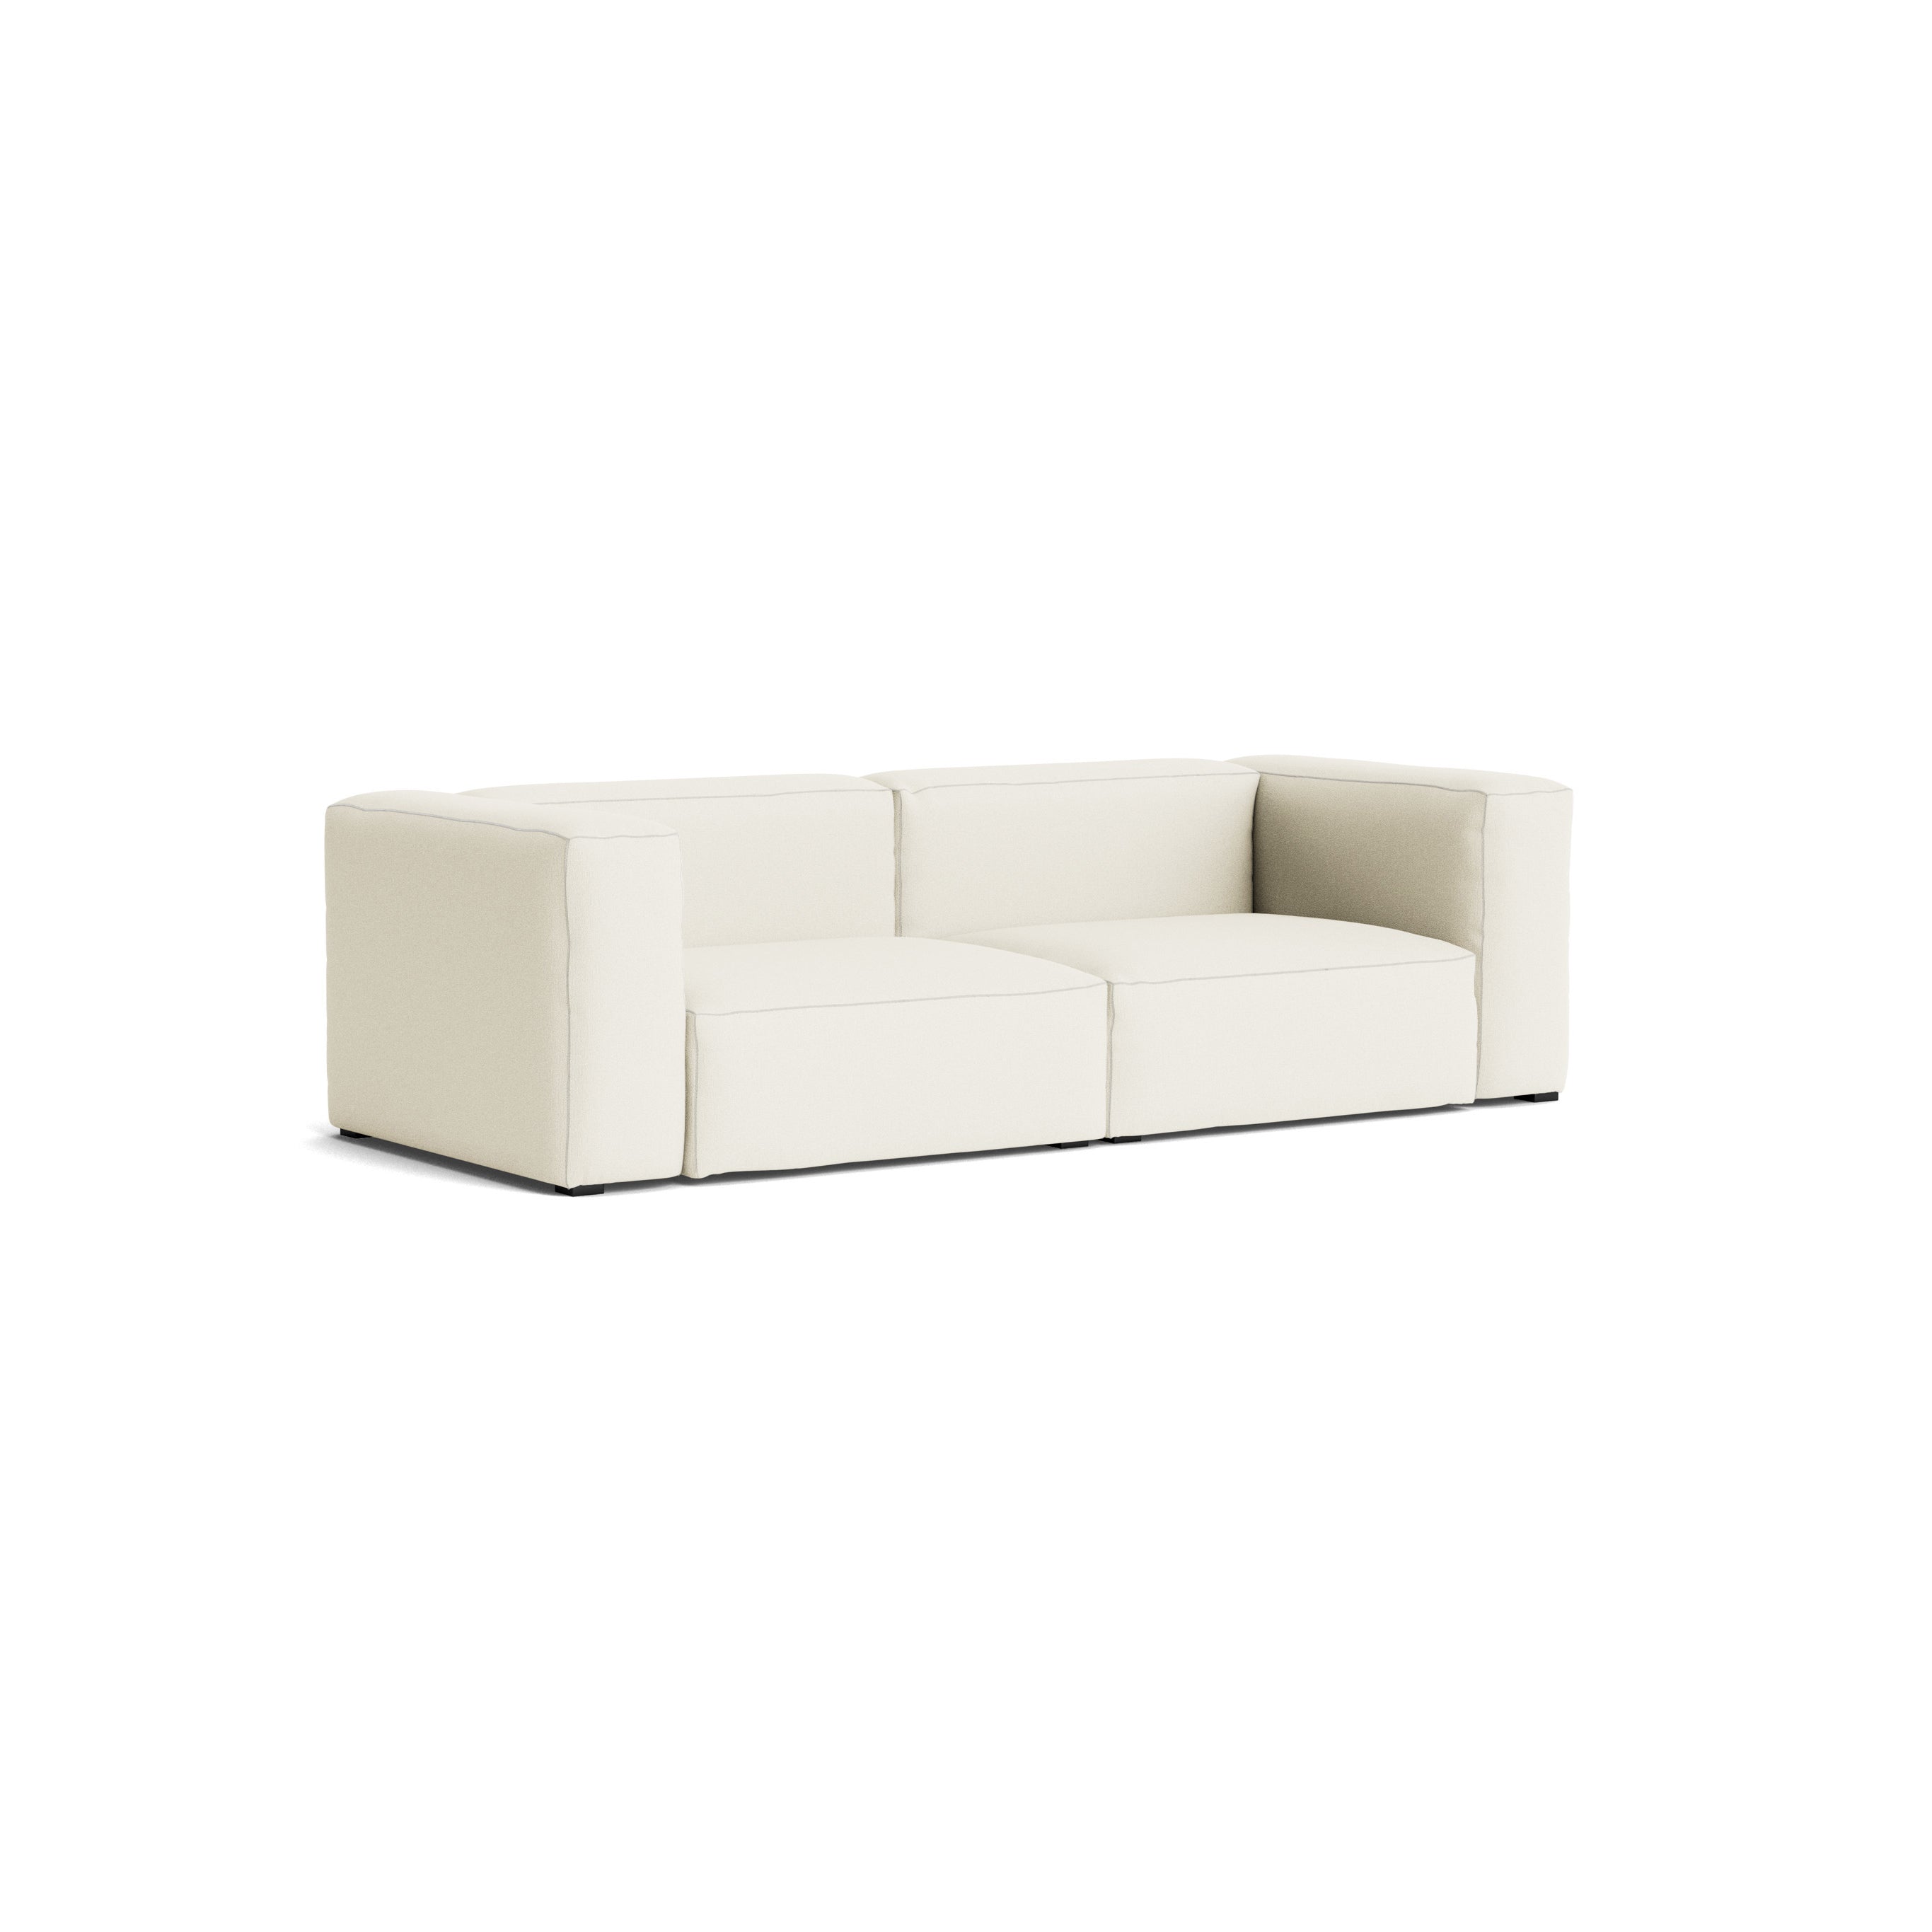 HAY Mags Soft Sofa 2.5 Seater - Combination 1